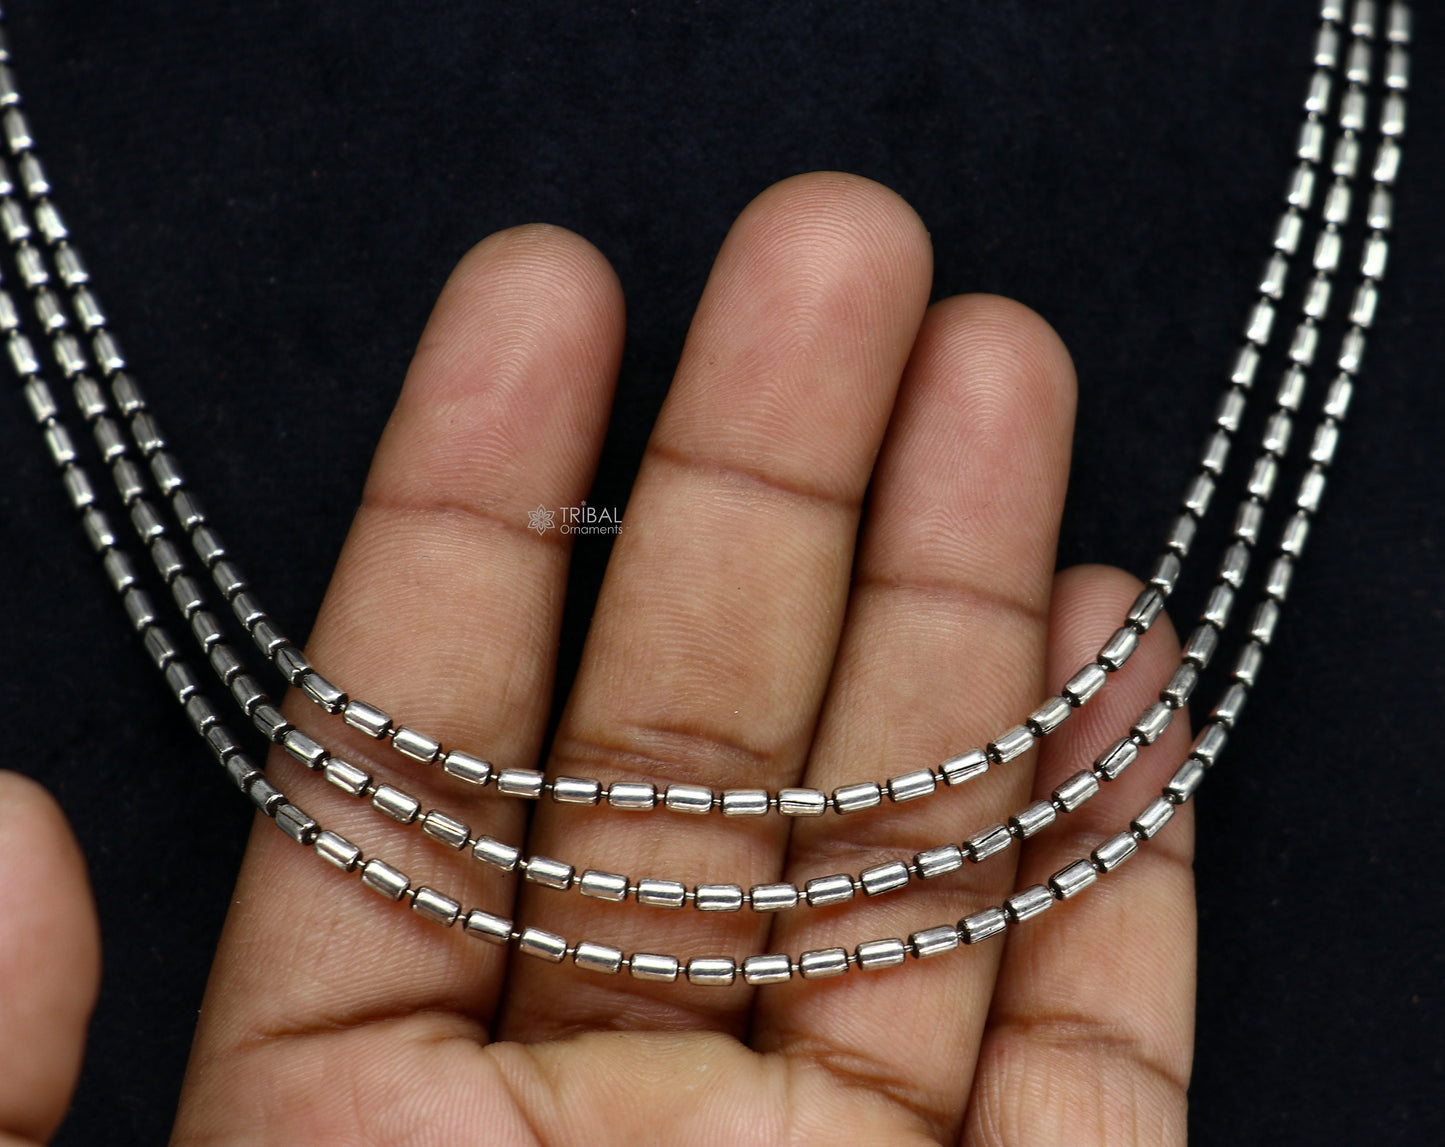 925 sterling silver fabulous 2mm 3 line strands unique stylish necklace jewelry, vintage style wedding charm layered necklace set643 - TRIBAL ORNAMENTS